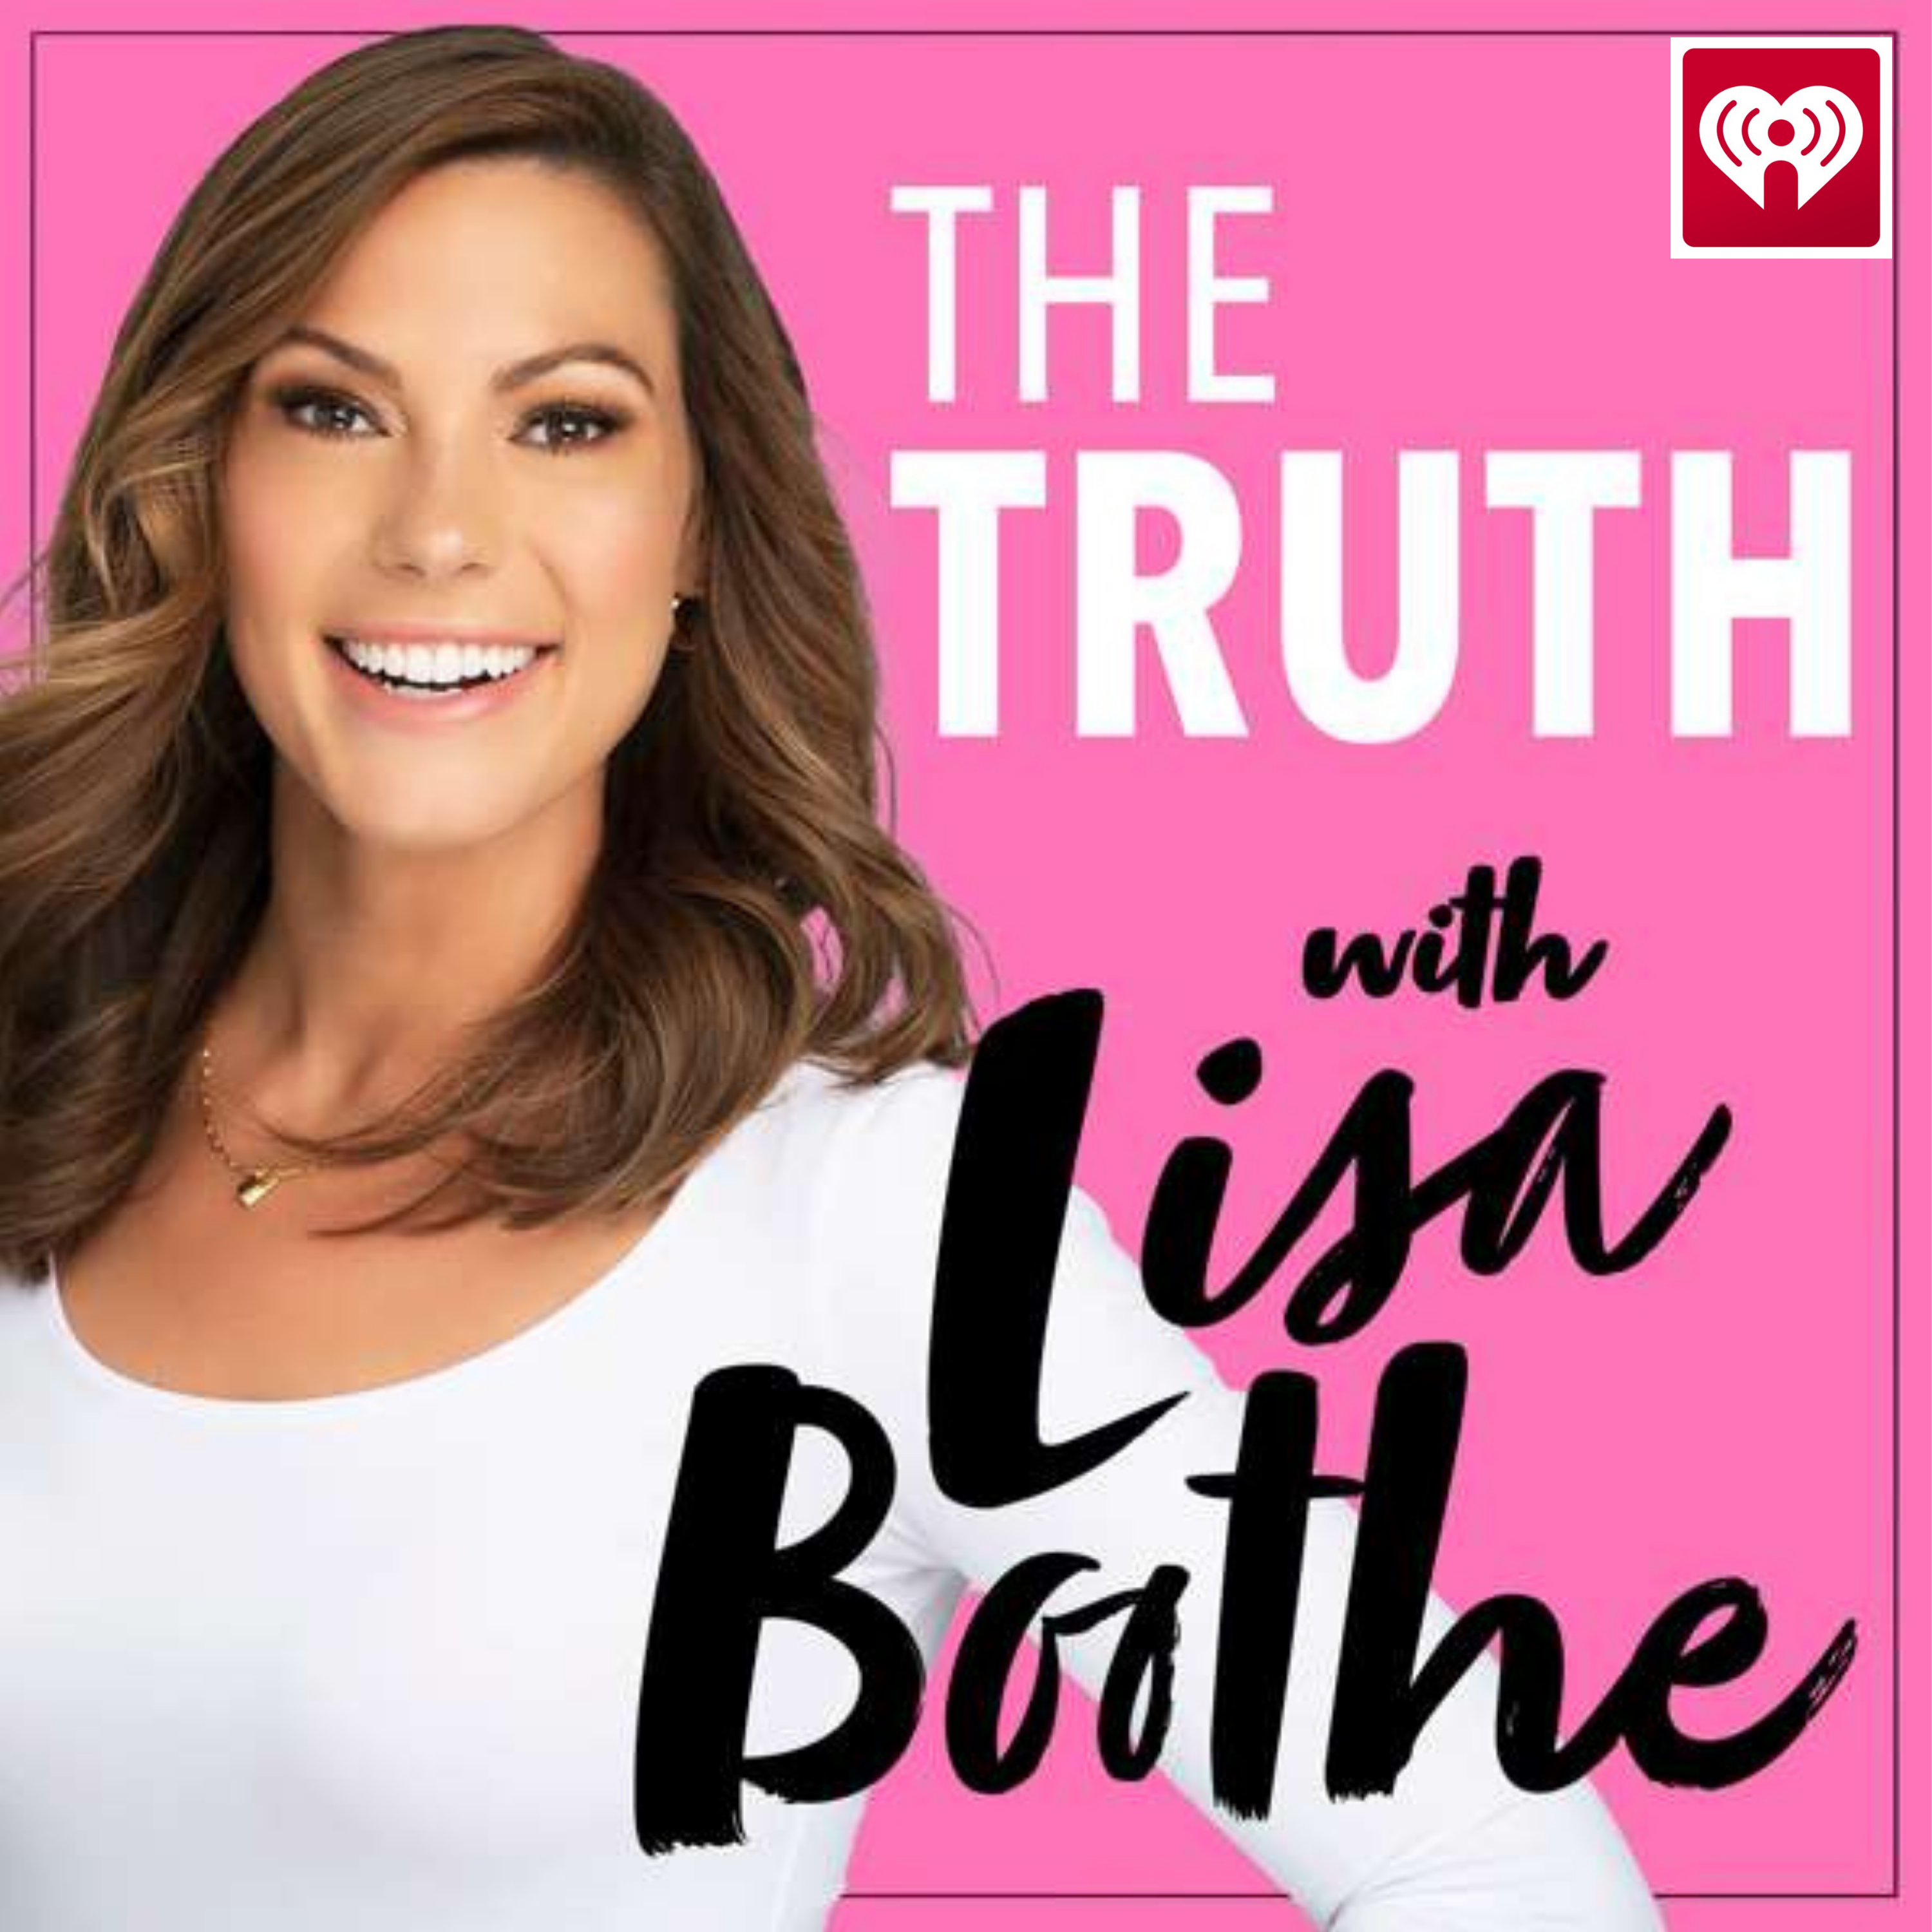 The Truth with Lisa Boothe: A Special Christmas Message from Rev. Franklin Graham